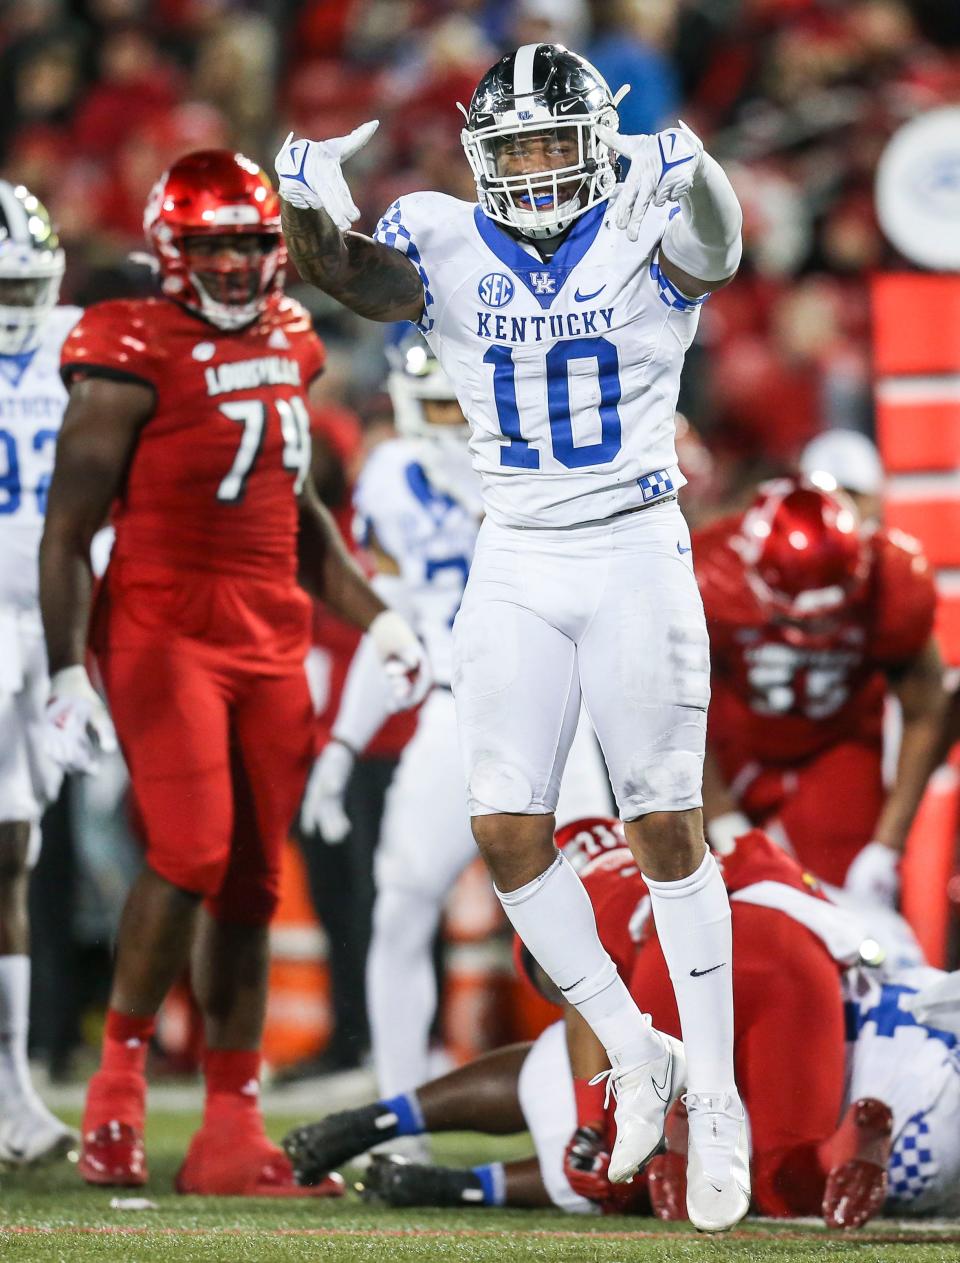 Kentucky's Jacquez Jones signals Ls down to the Cardinal crowd after stopping Louisville's Trevion Cooley for a loss in the second half as the Wildcats rolled past Louisville 52-21 Saturday night. Nov. 27, 2021 